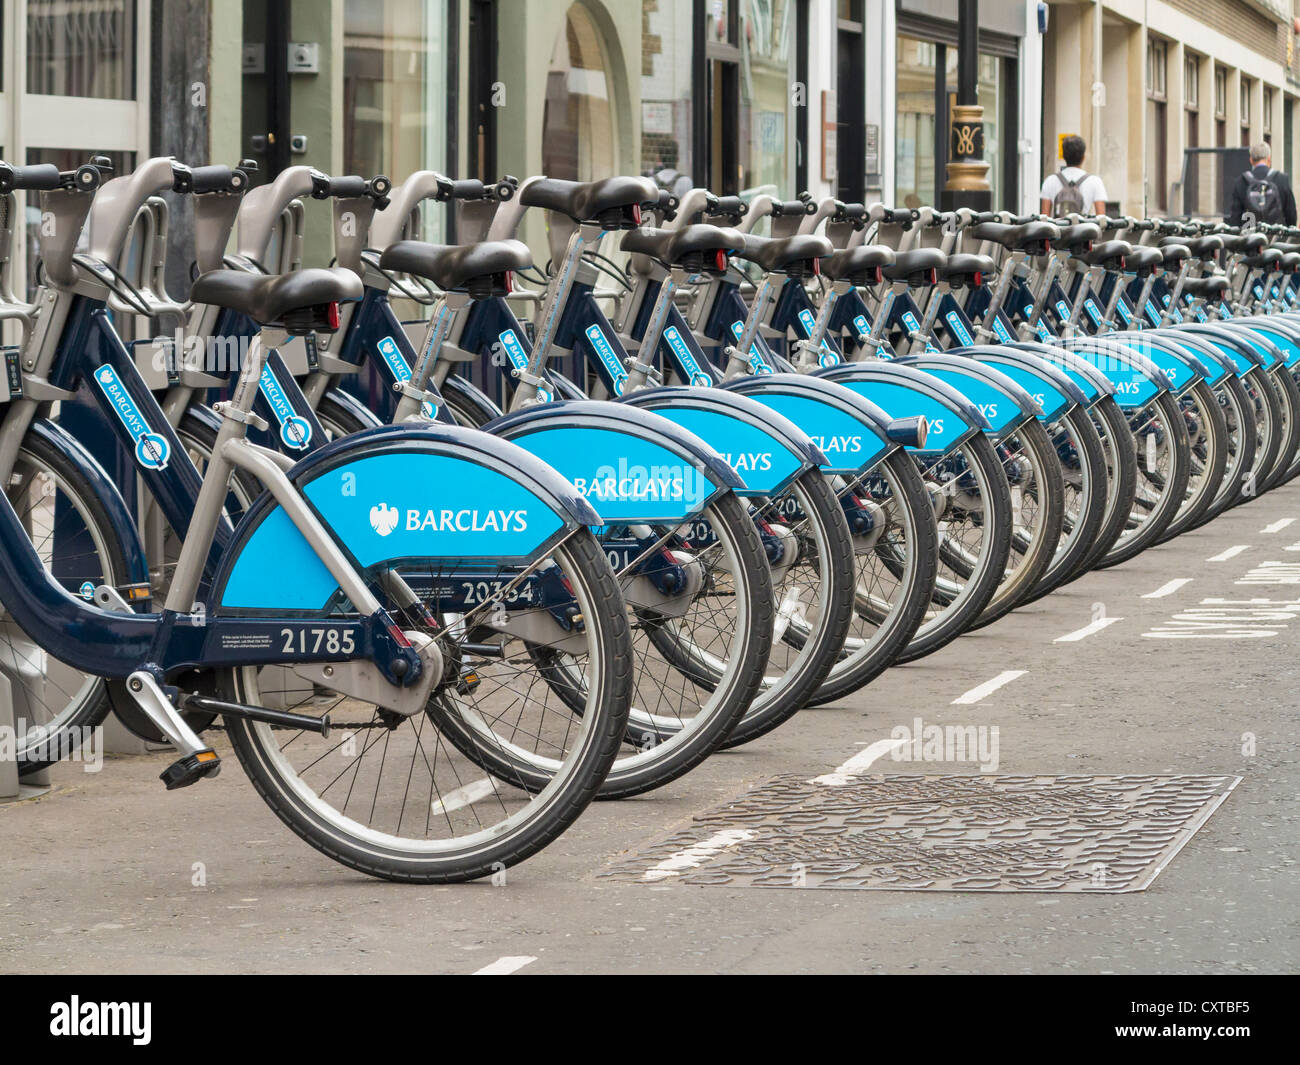 Boris bikes, cycles for hire rental in docking bay,London, England Stock Photo